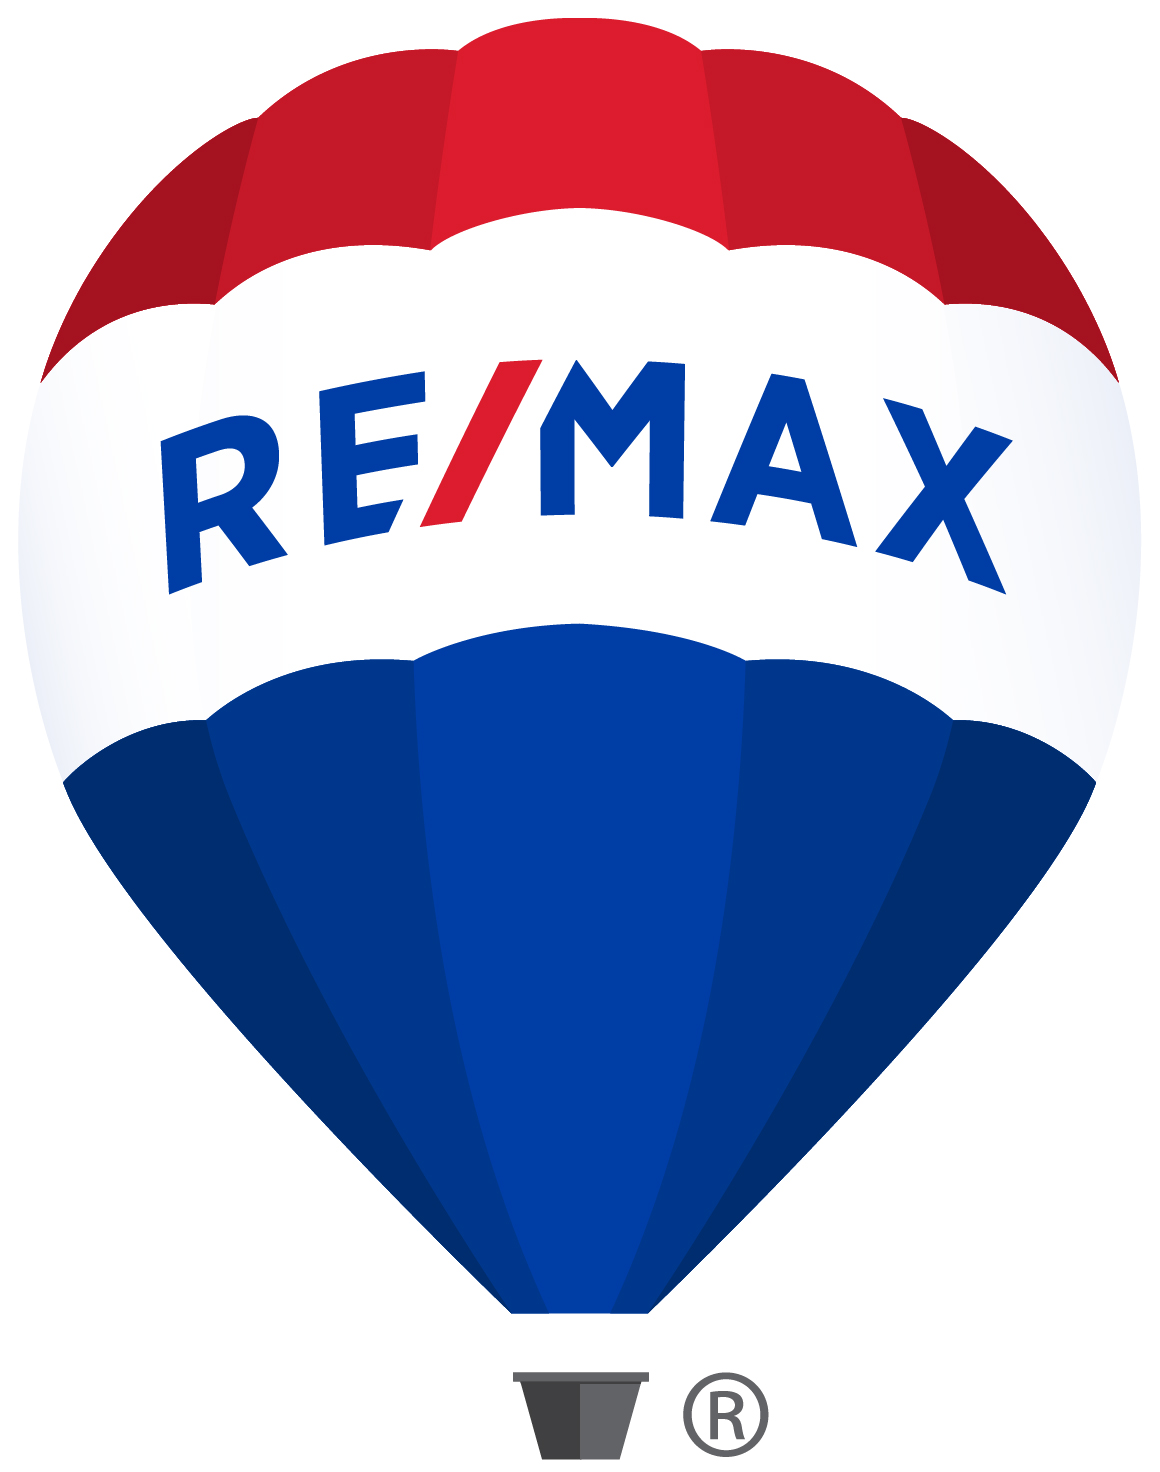 Remax Northern Realty